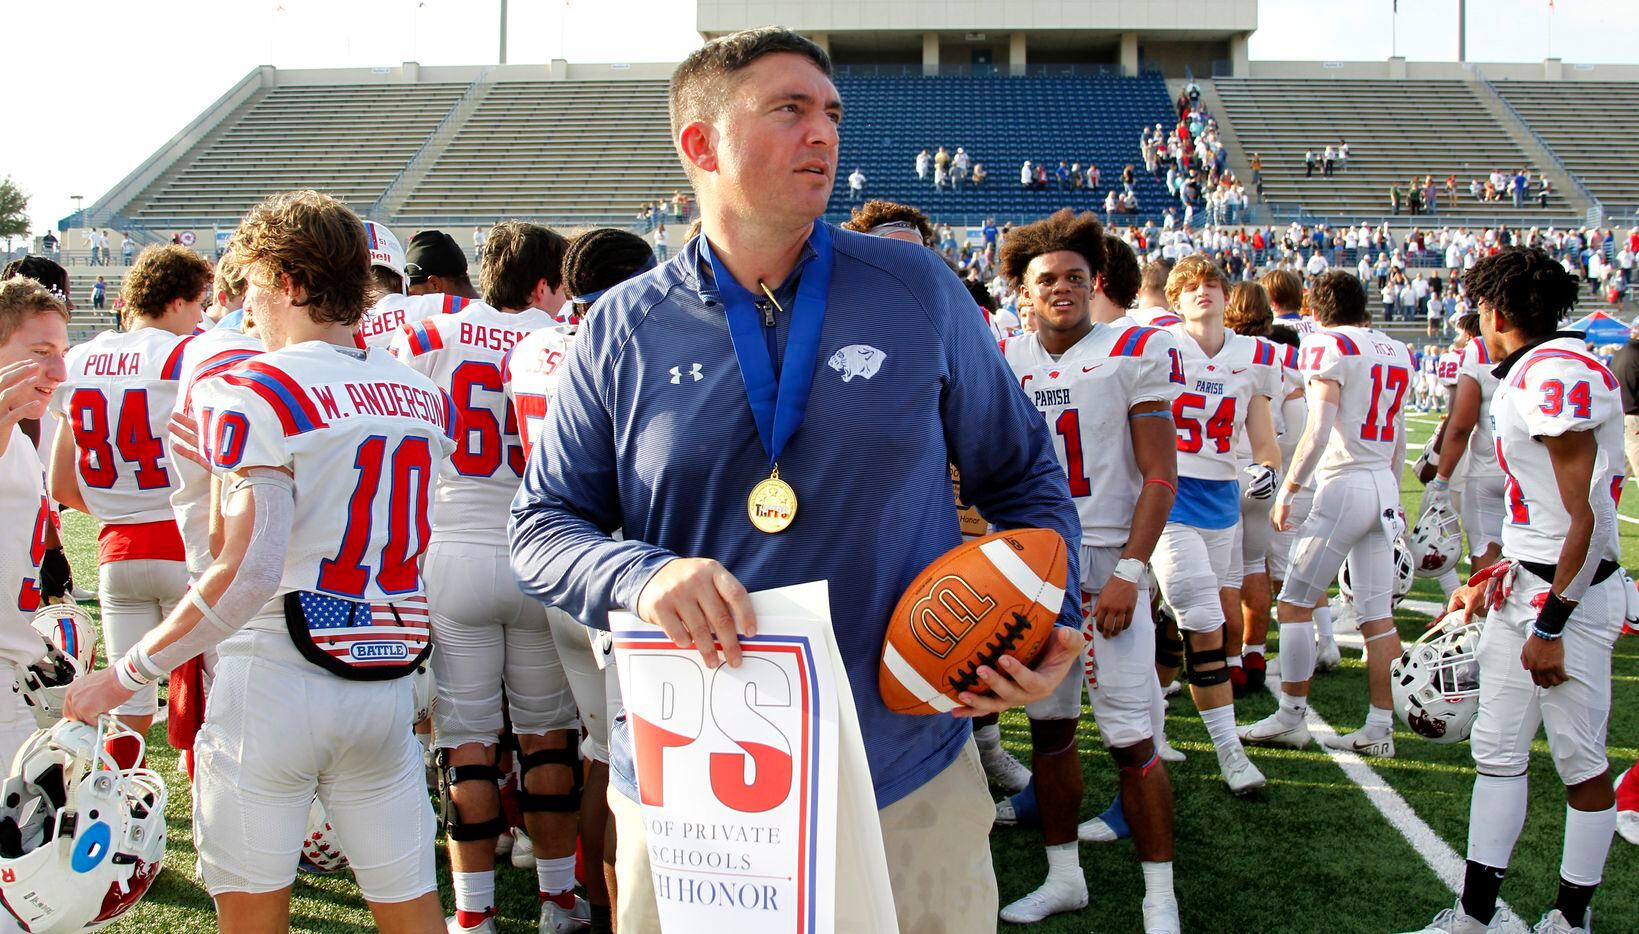 Parish Episcopal head coach Daniel Novakov led his team to a 56-17 victory over Midland Christian to capture the Division 1 championship.  The two teams played their TAPPS Division 1 state championship football game at Waco ISD Stadium in Waco on December 4, 2021. (Steve Hamm/ Special Contributor)